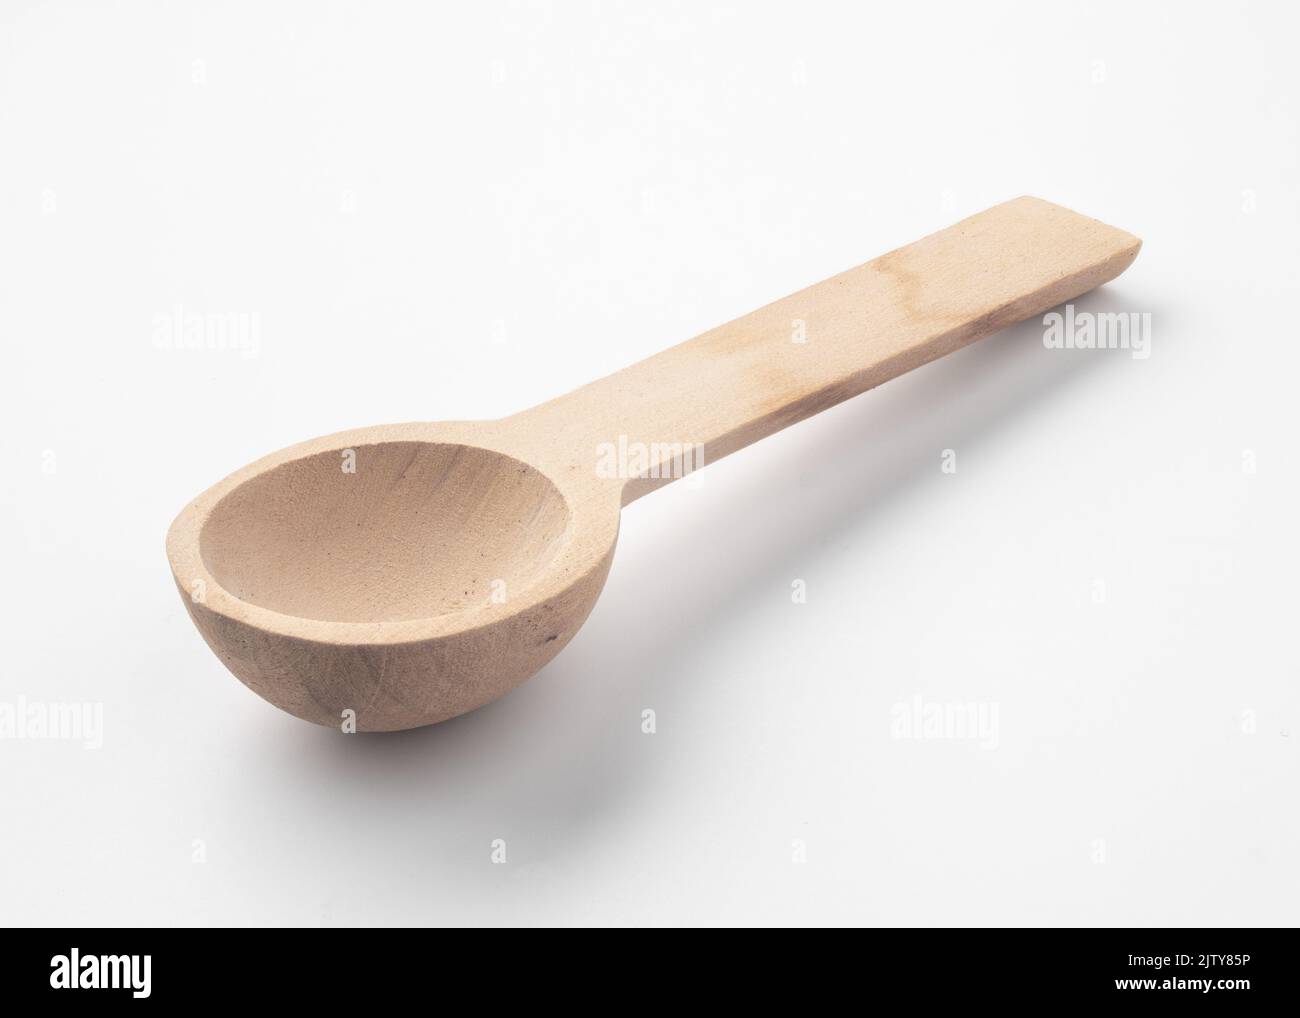 Traditional wooden spoon on white surface Stock Photo